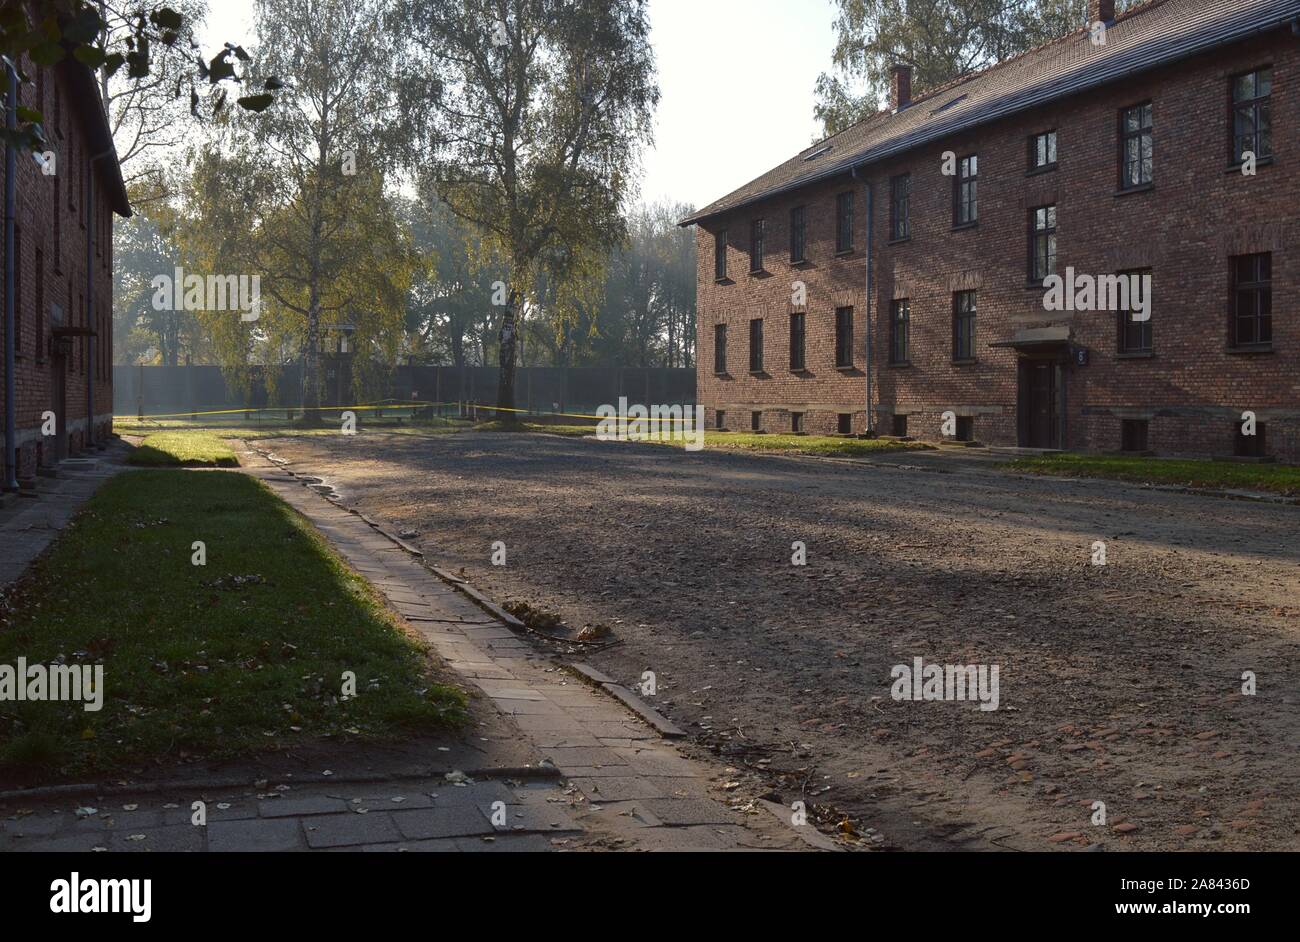 Architecture of Auschwitz concentration camp in Poland Stock Photo